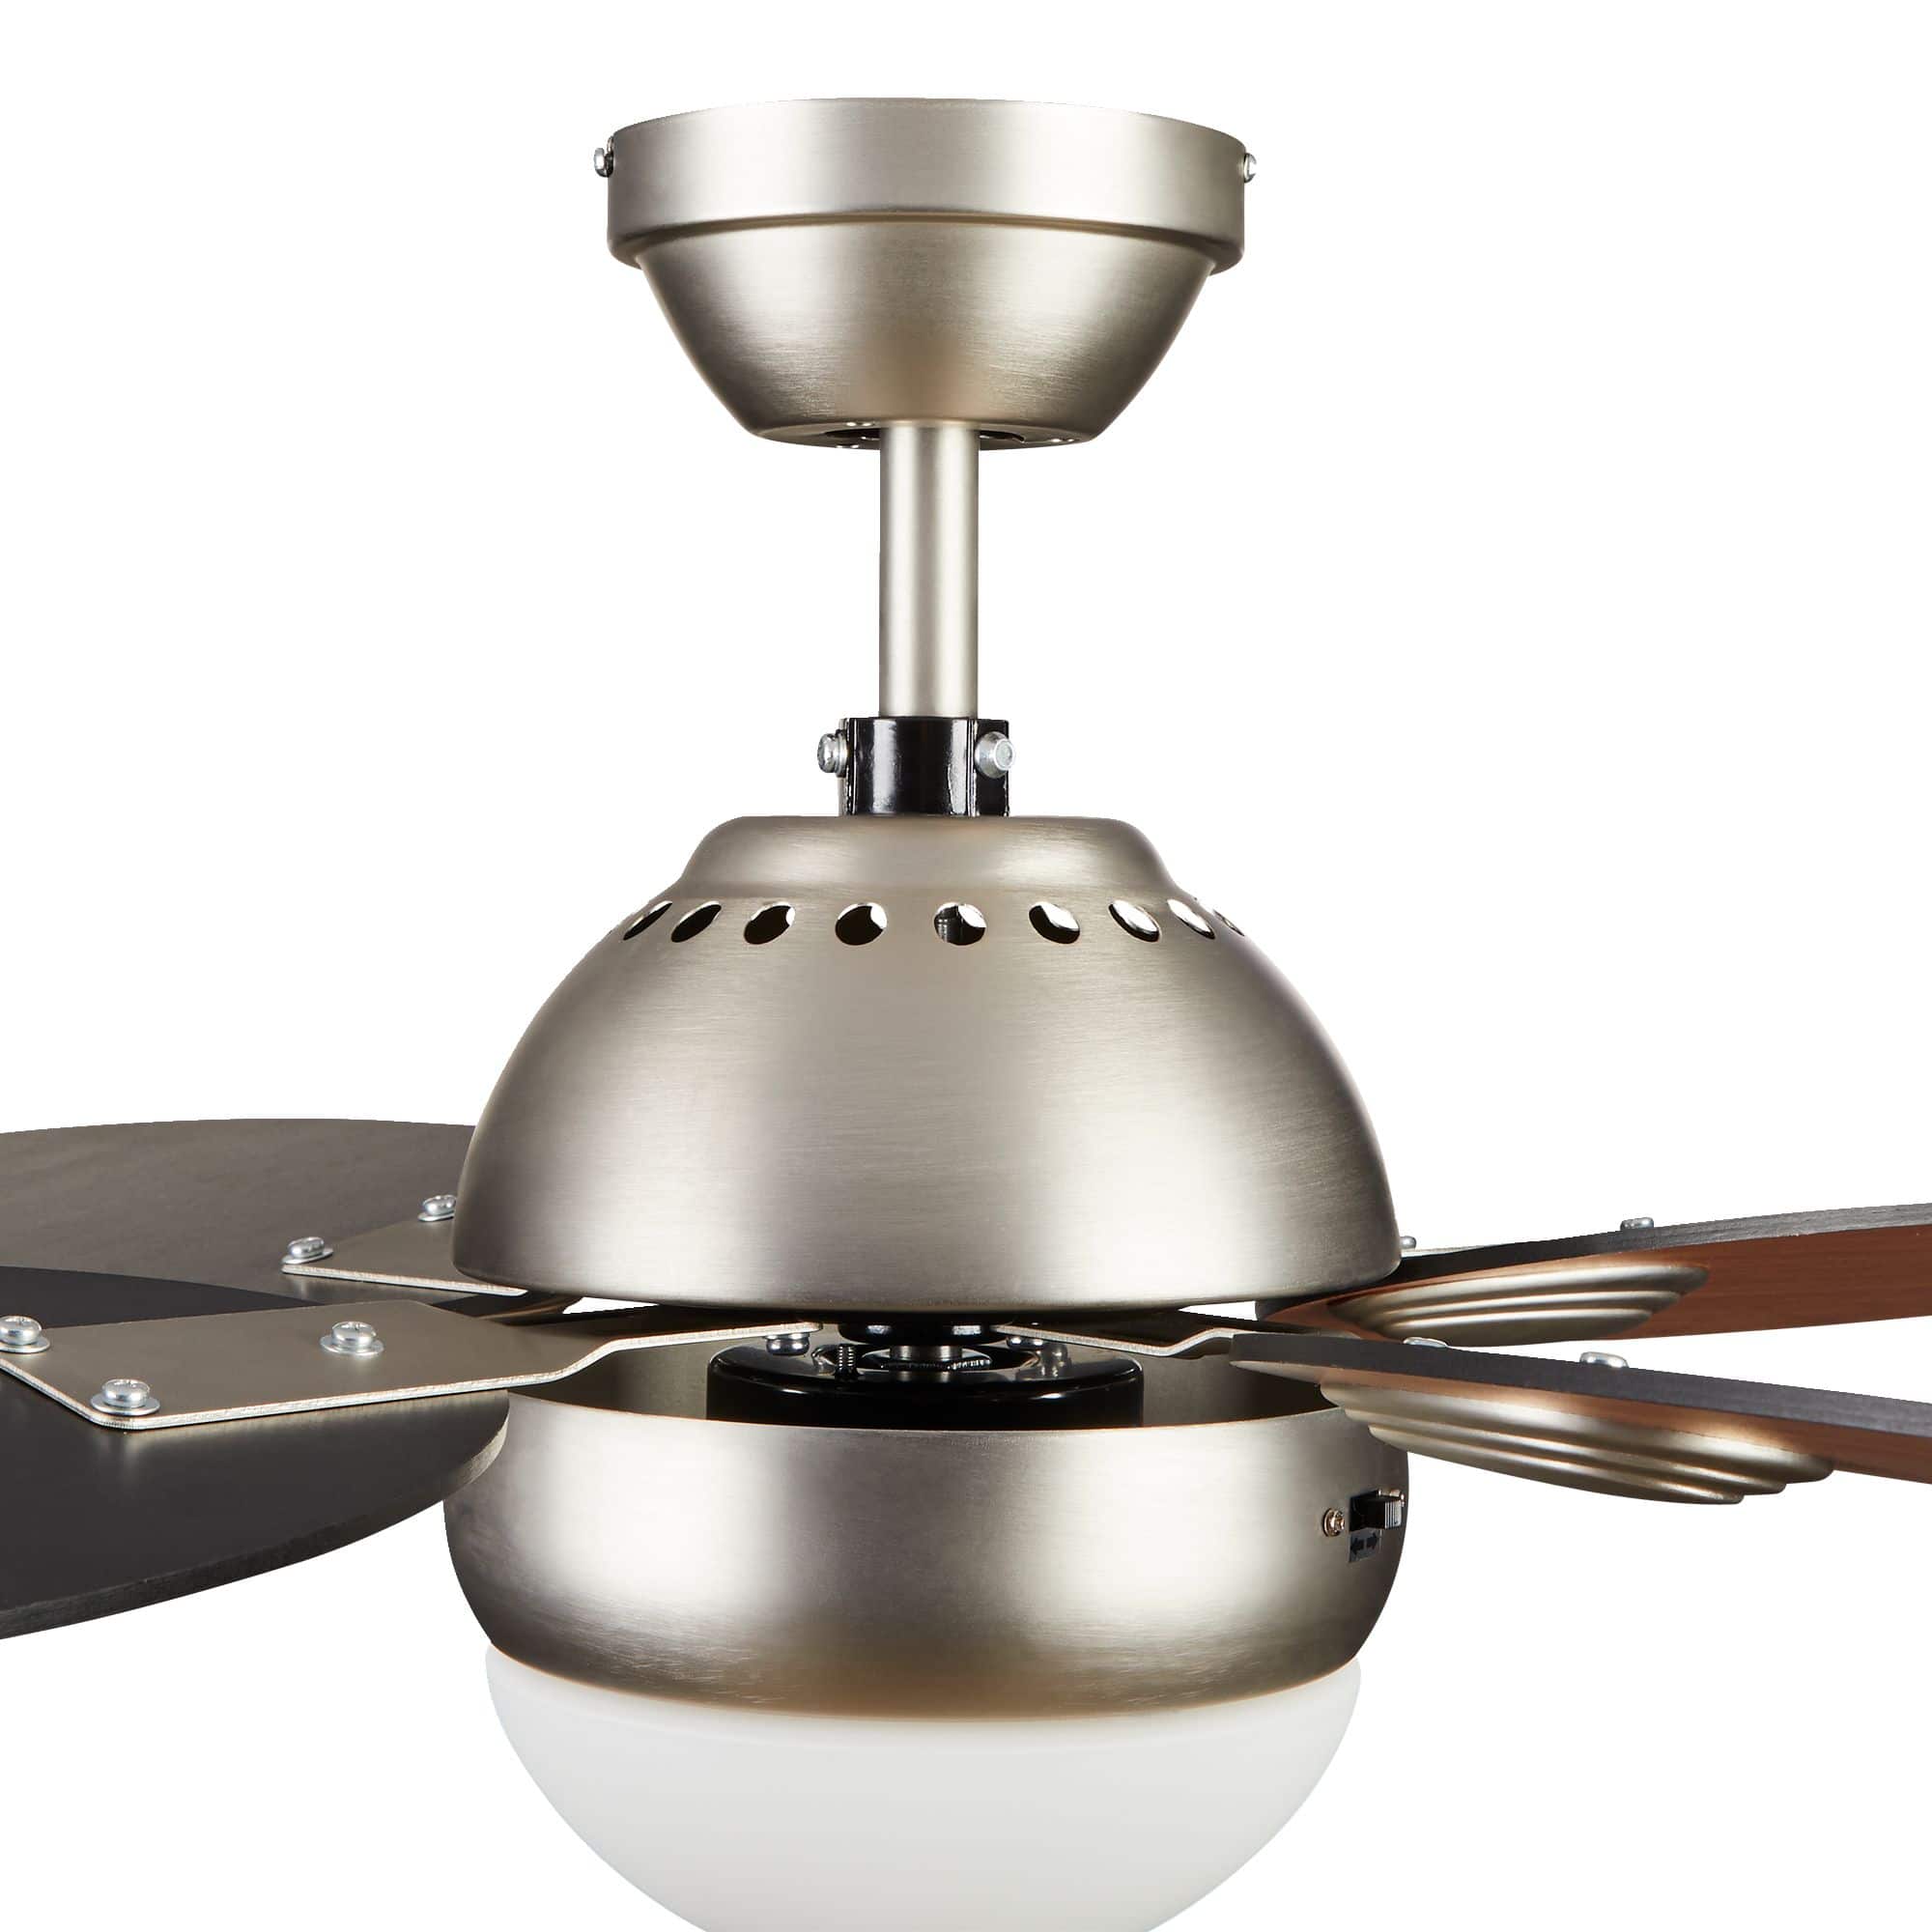 NOMA Scandinavian Reversible 4-Blade 3-Speed Ceiling Fan with